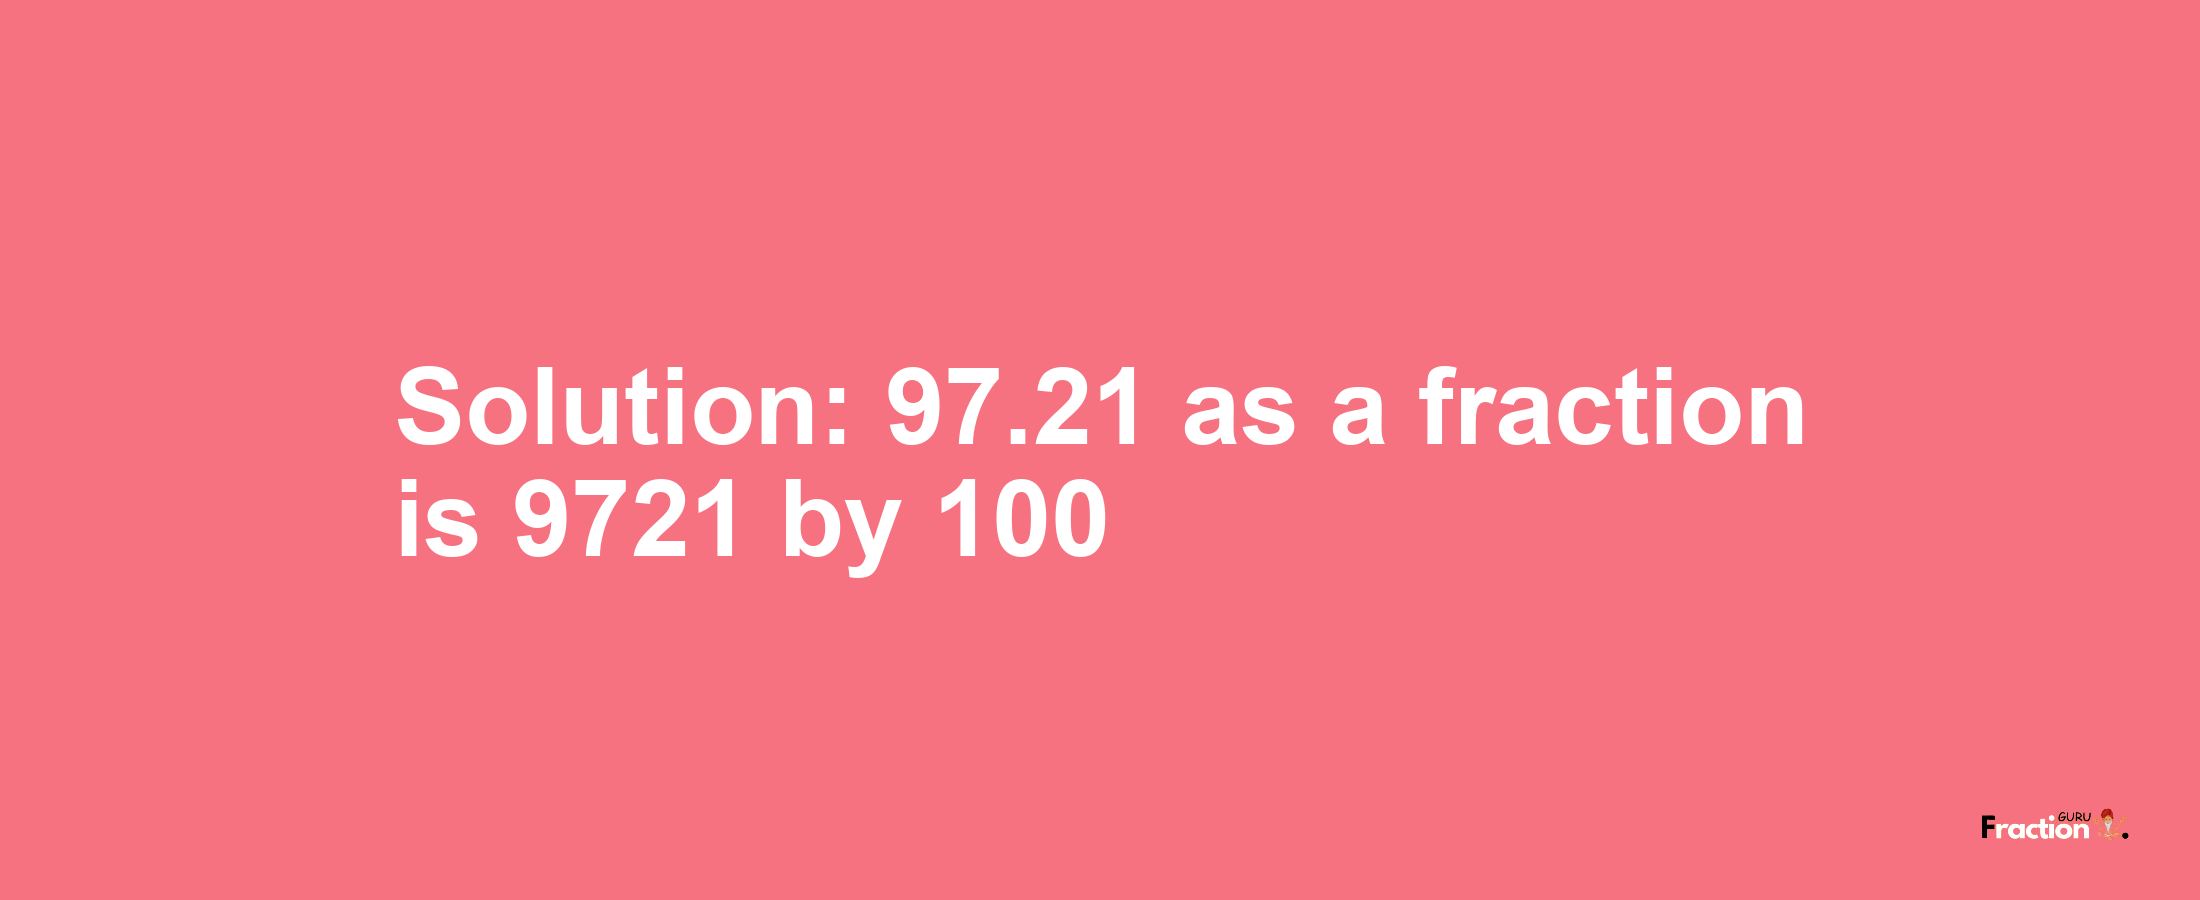 Solution:97.21 as a fraction is 9721/100